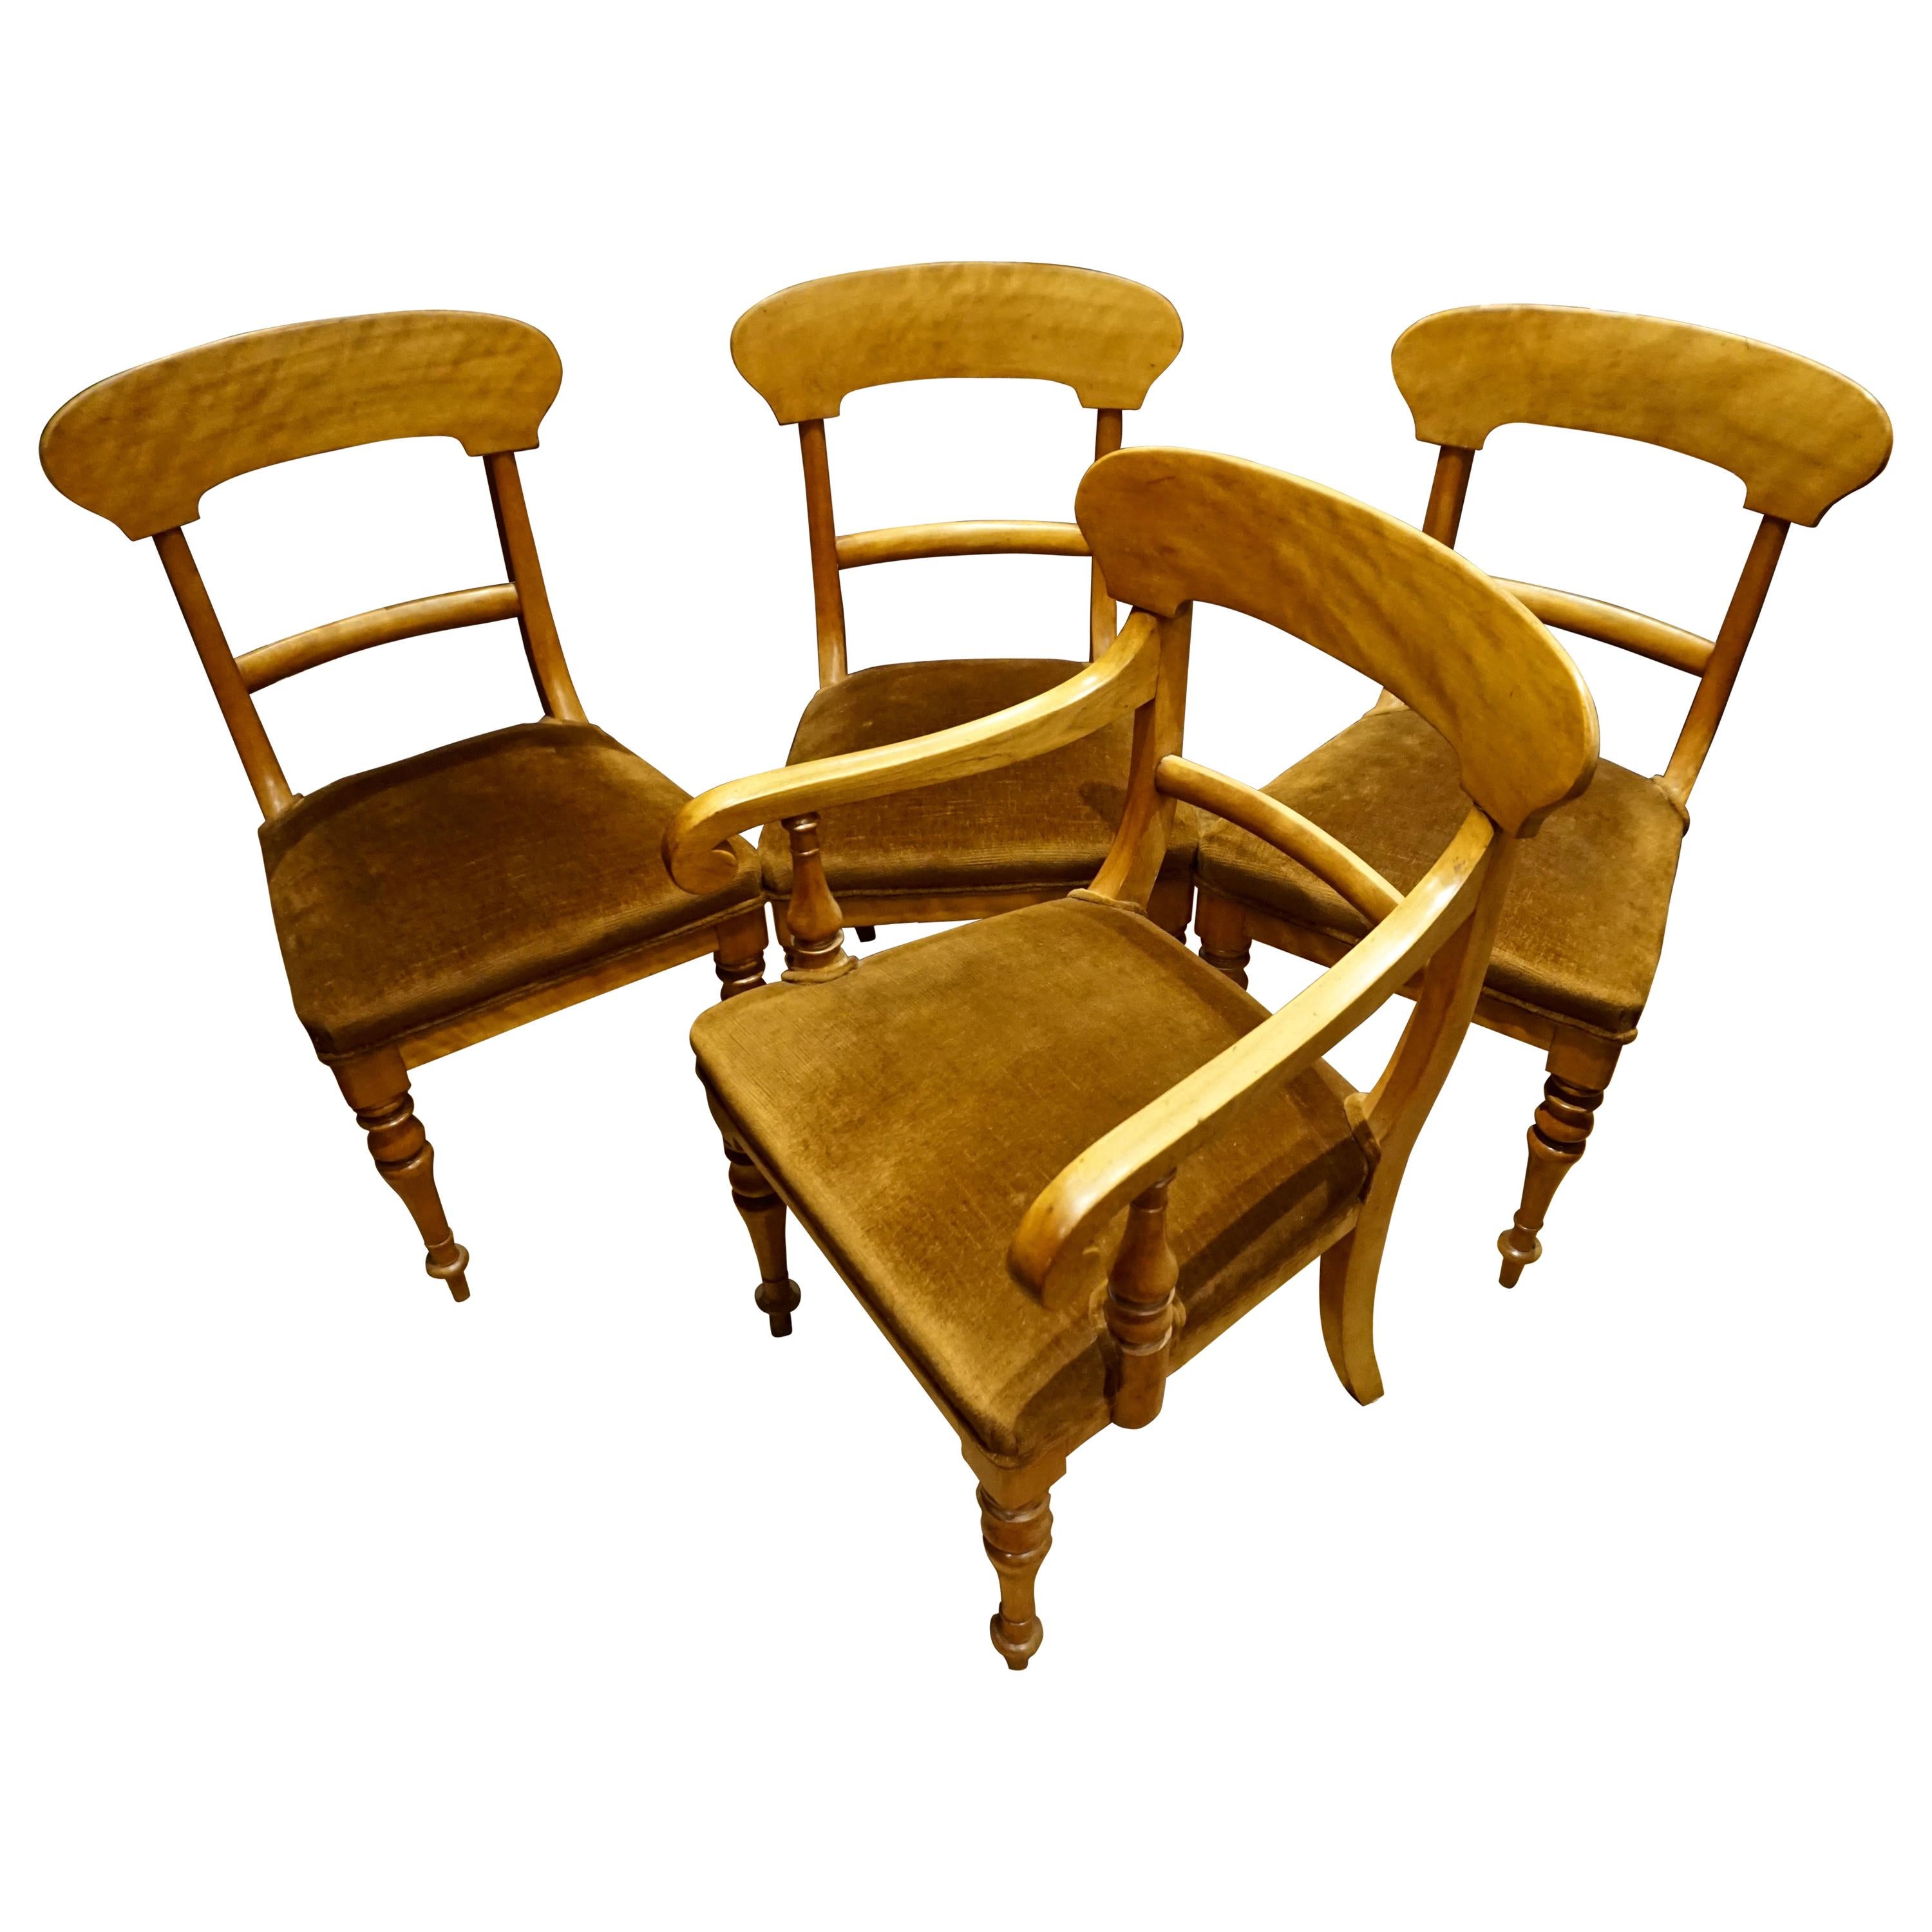 Set of Four Pearwood Chairs England with Horsehair Upholstery